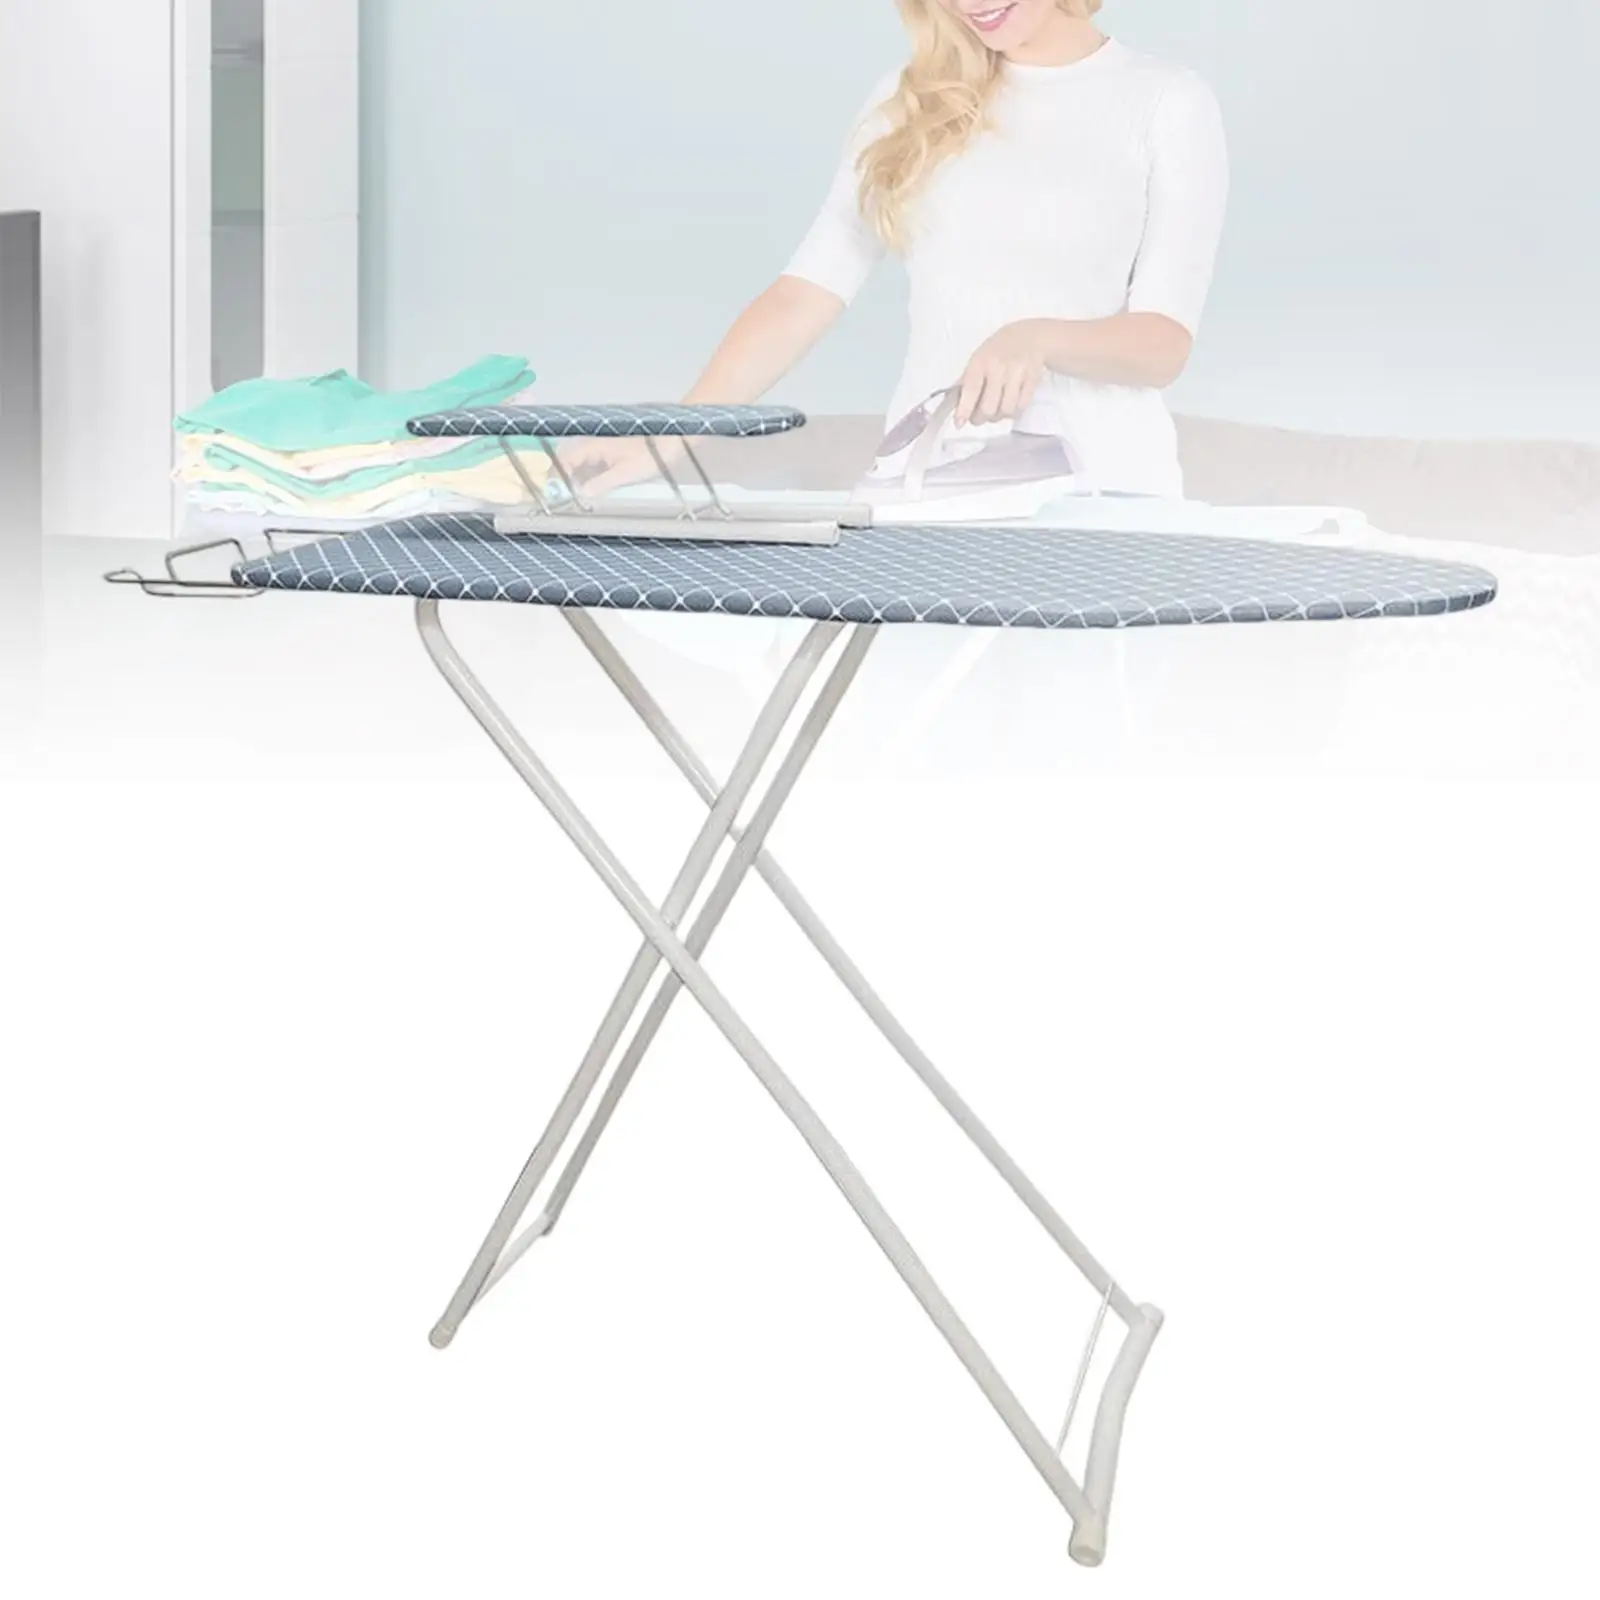 New Hand-held Ironing Board Anti-scald Washable Iron Pad Cover Household  Clothes Suit Ironing Board Mini Portable Heat-resistant - AliExpress